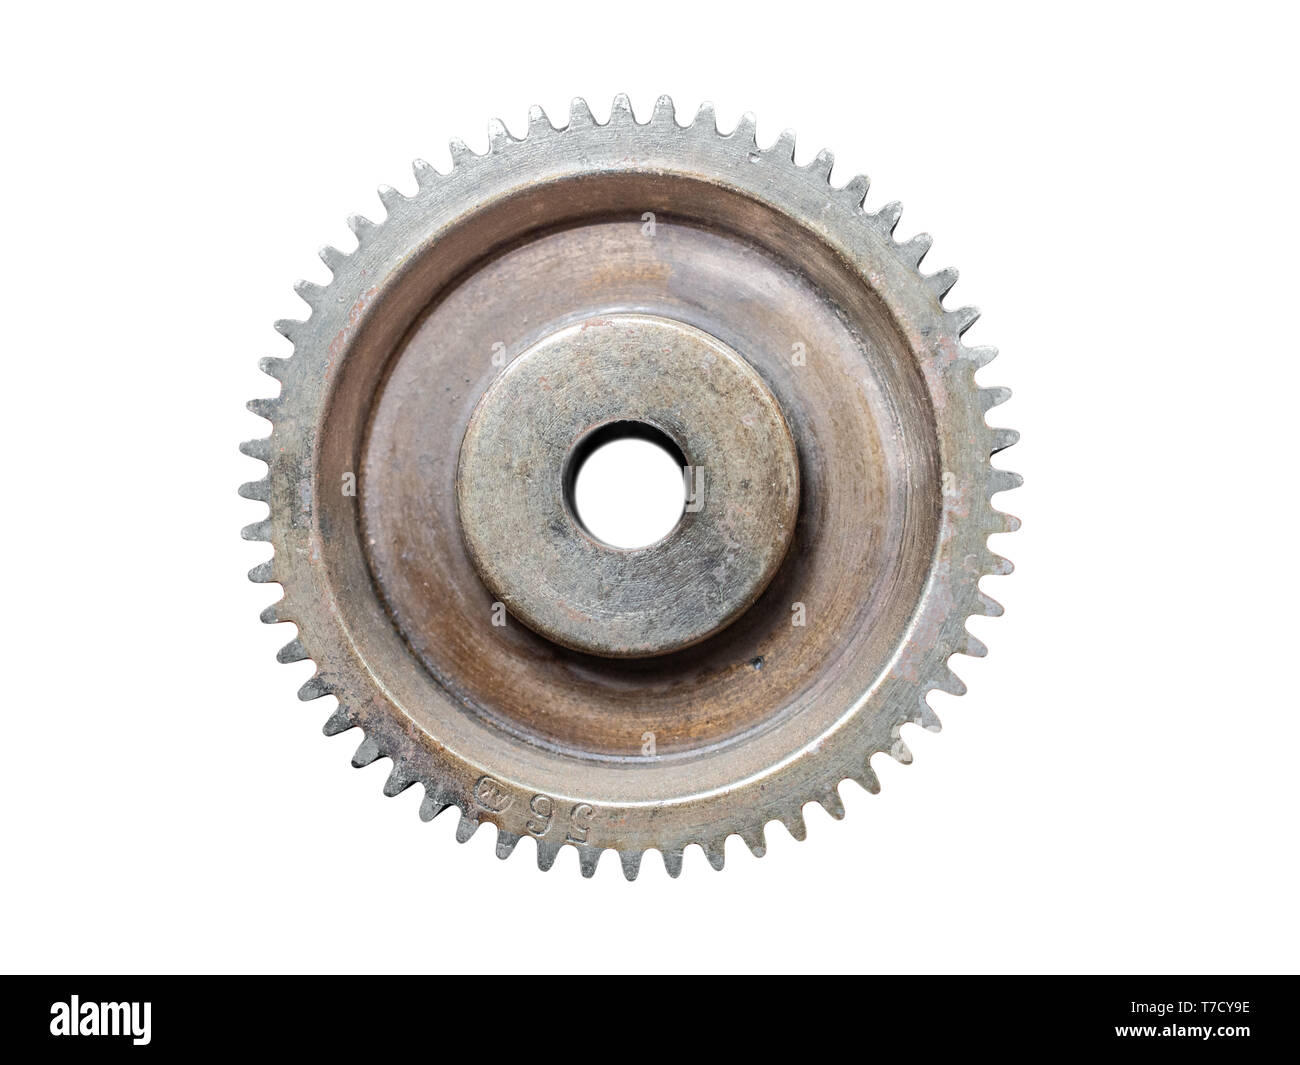 Gear (cogwheel) isolated on white background, front view Stock Photo